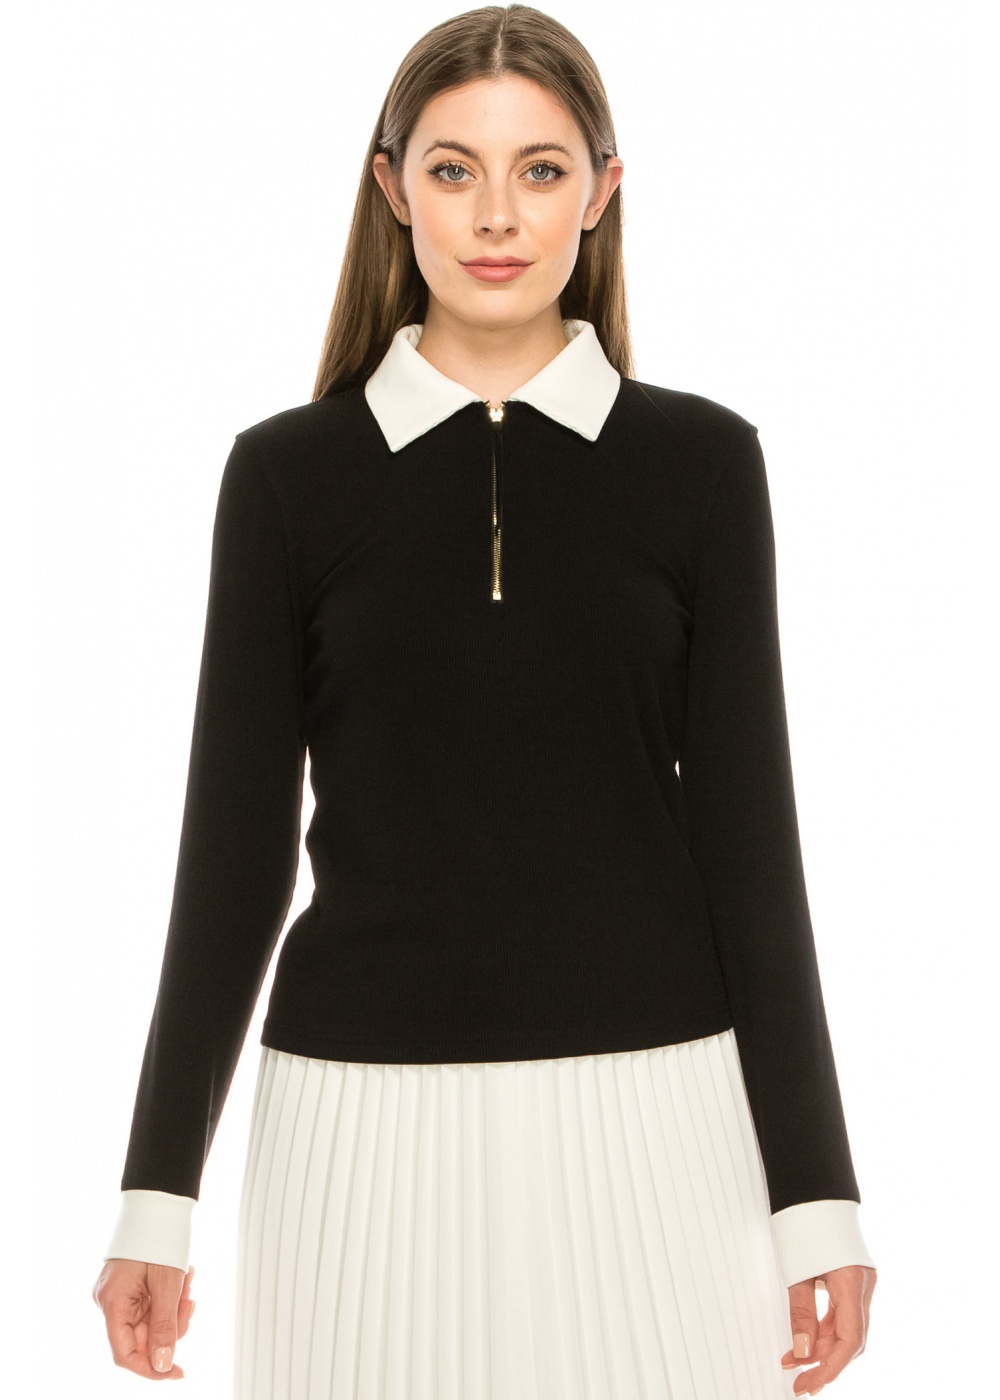 Black and White Collared Sweater